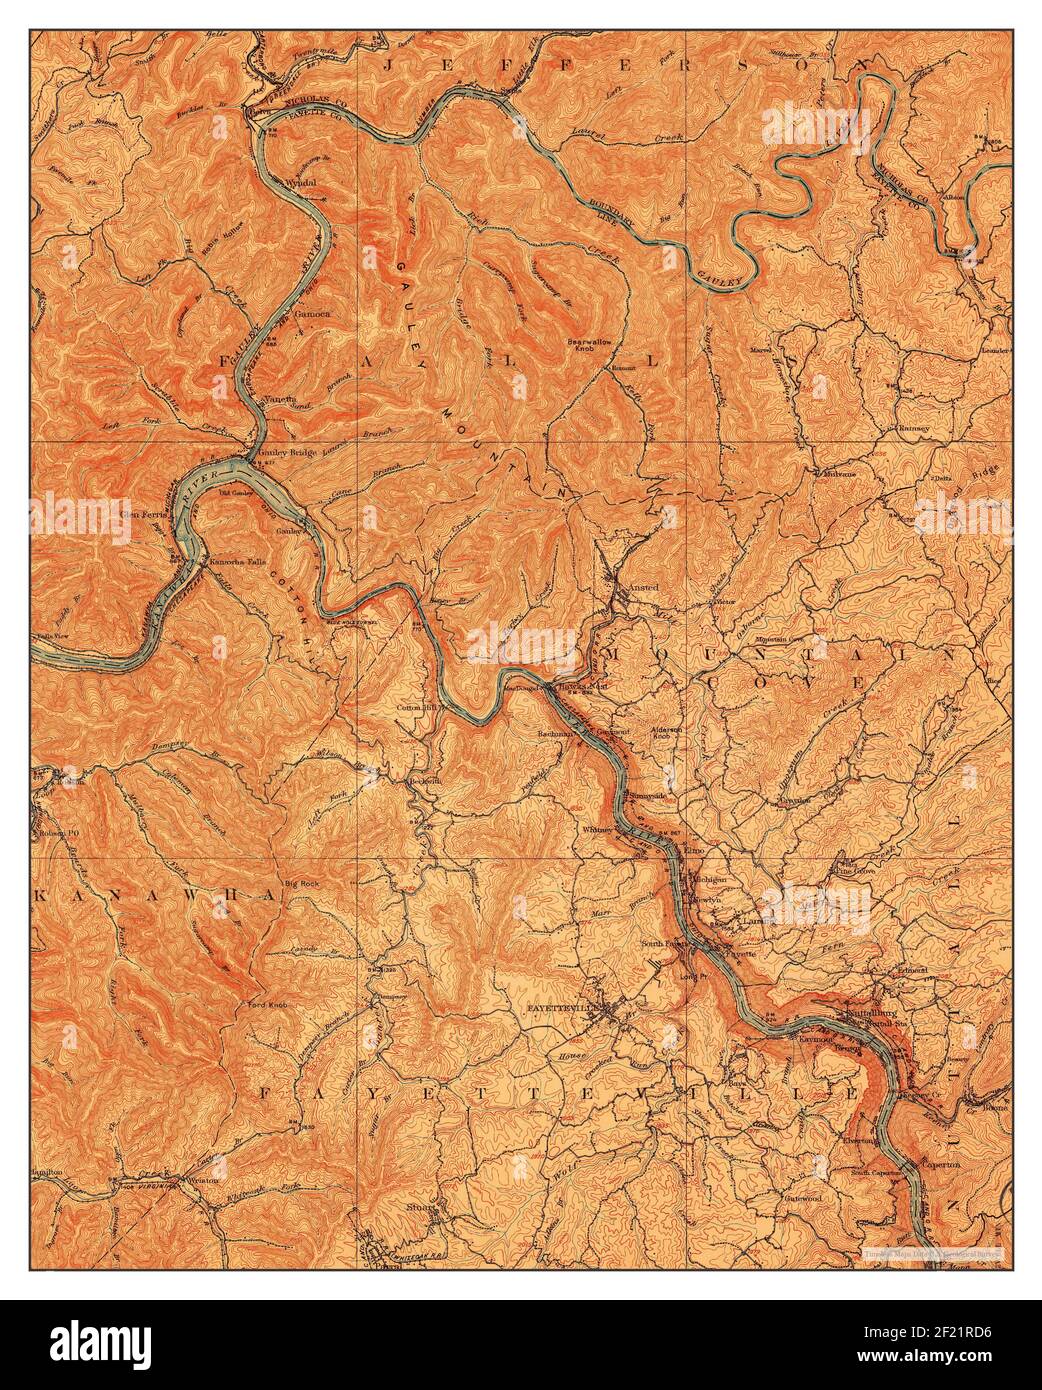 Fayetteville, West Virginia, map 1910, 1:62500, United States of America by Timeless Maps, data U.S. Geological Survey Stock Photo